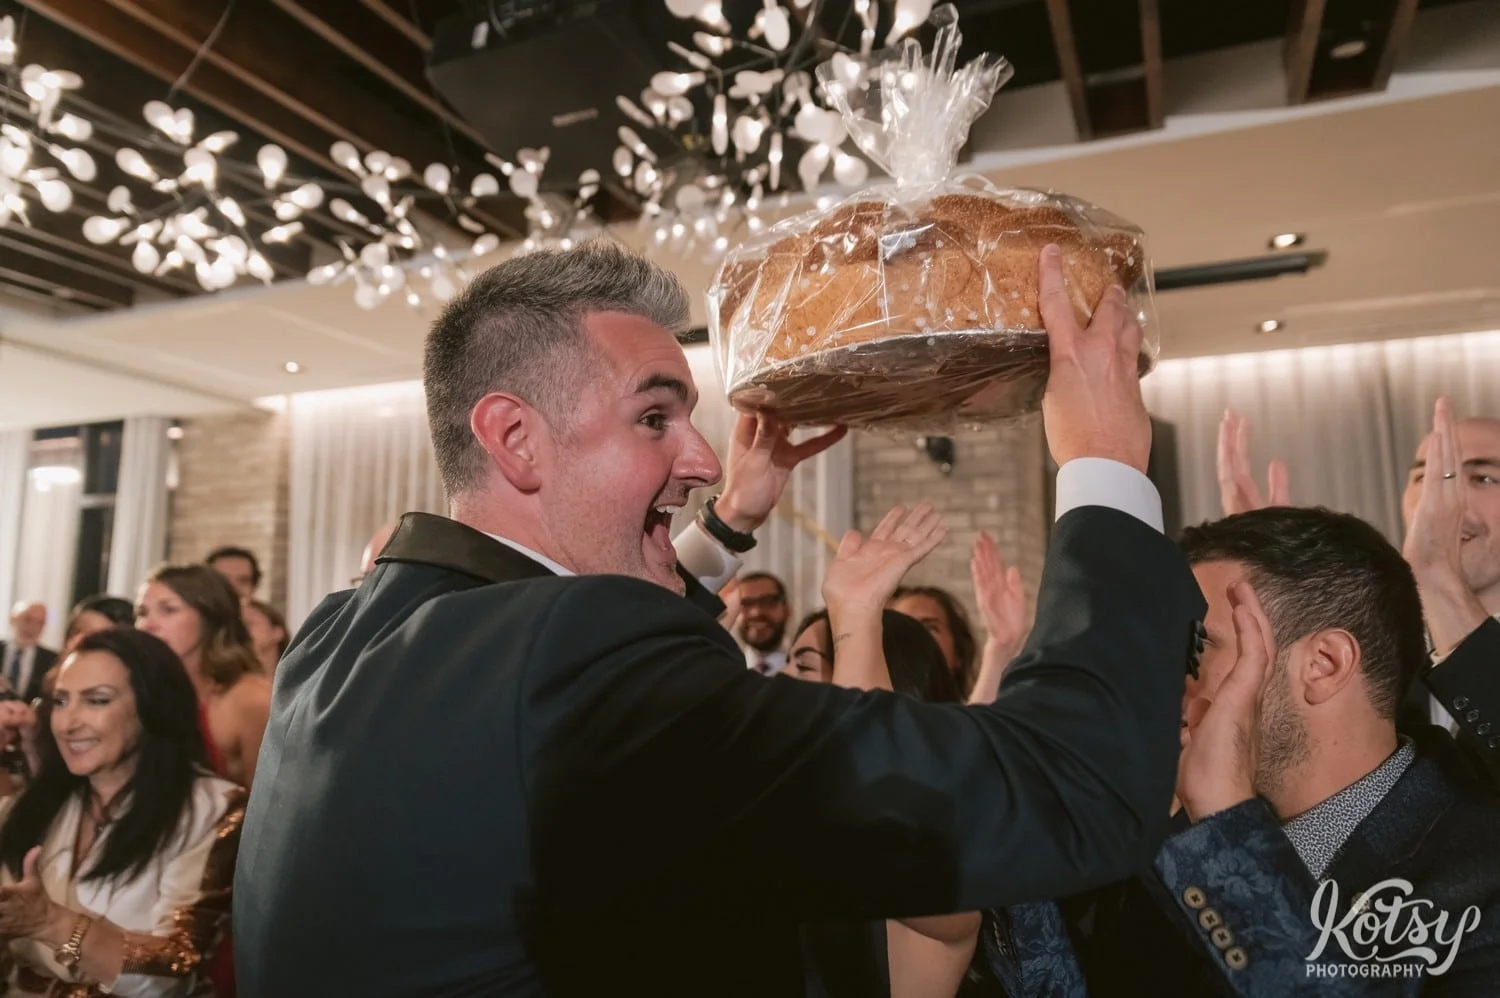 A groom smiles big as he hold a big loaf of bread at his Village Loft wedding reception in Toronto, Canada